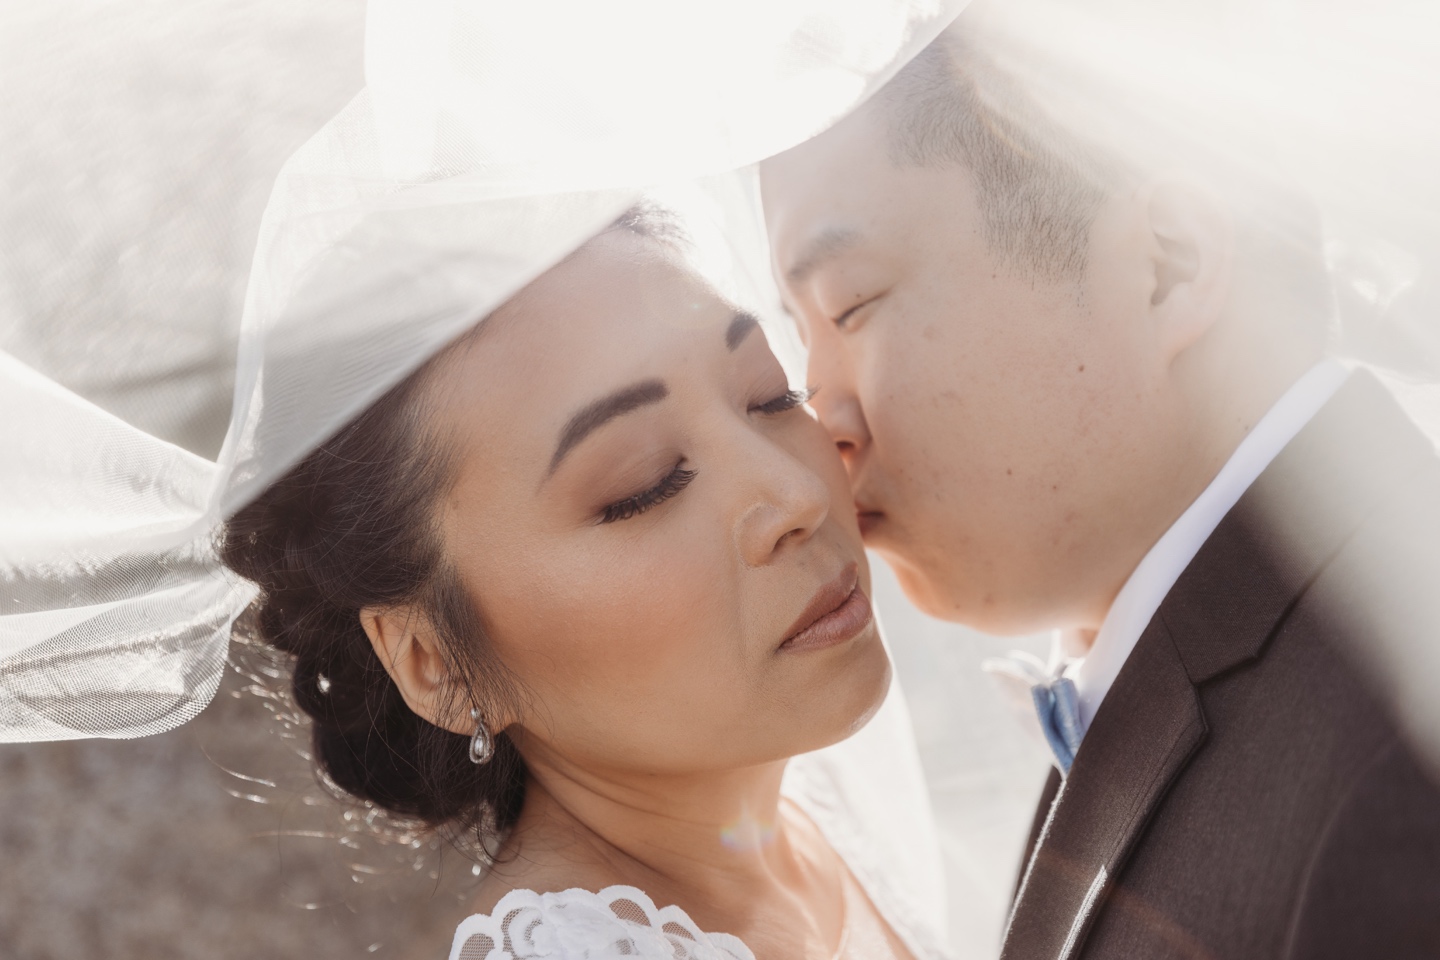 Groom kisses bride on the cheek as they're surrounded her veil and an ethereal glow.